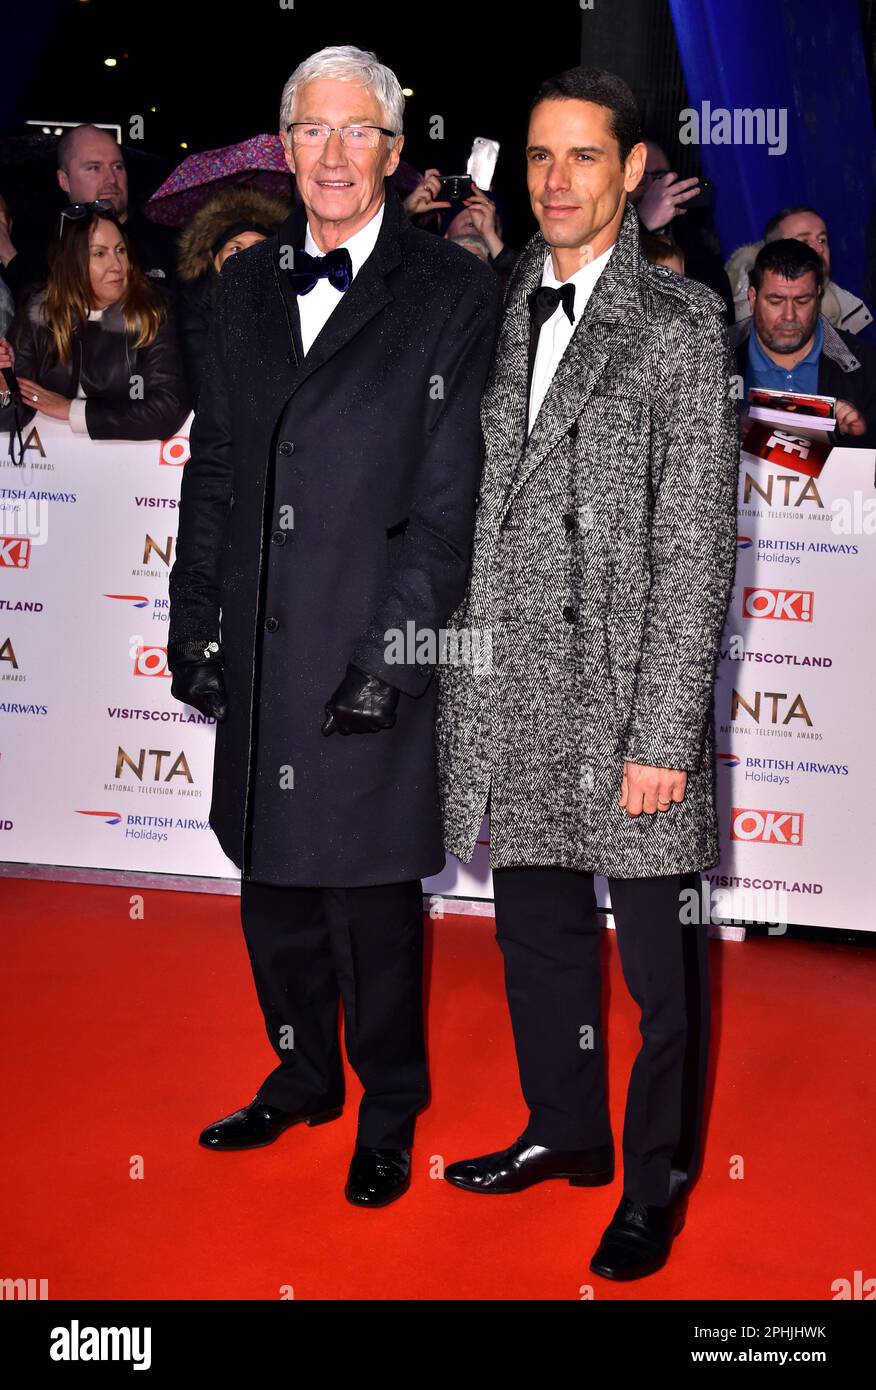 File photo dated 22/01/19 of Paul O'Grady and Andre Portasio attending the National Television Awards 2019 held at the O2 Arena, London. TV presenter and comedian Paul O'Grady has died at the age of 67, his partner Andre Portasio has said. The TV star, also known for his drag queen persona Lily Savage, died 'unexpectedly but peacefully' on Tuesday evening, a statement shared with the PA news agency via a representative said. Issue date: Wednesday March 29, 2023. Stock Photo